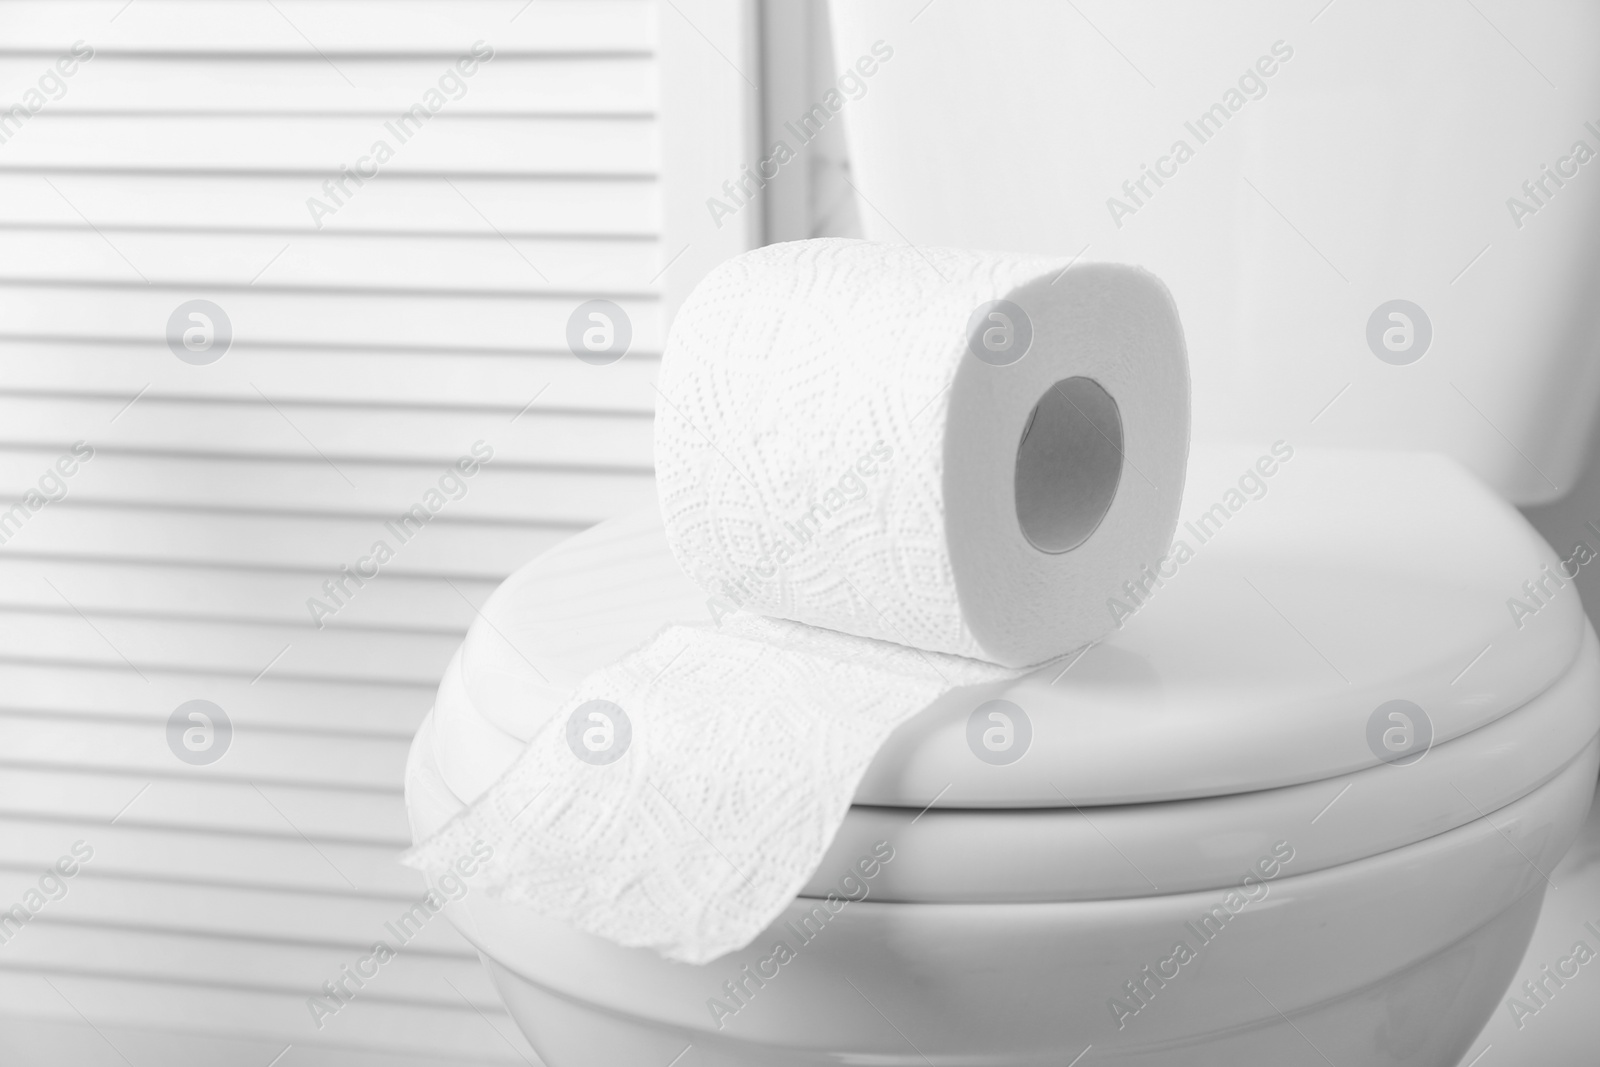 Photo of New paper roll on toilet bowl in bathroom